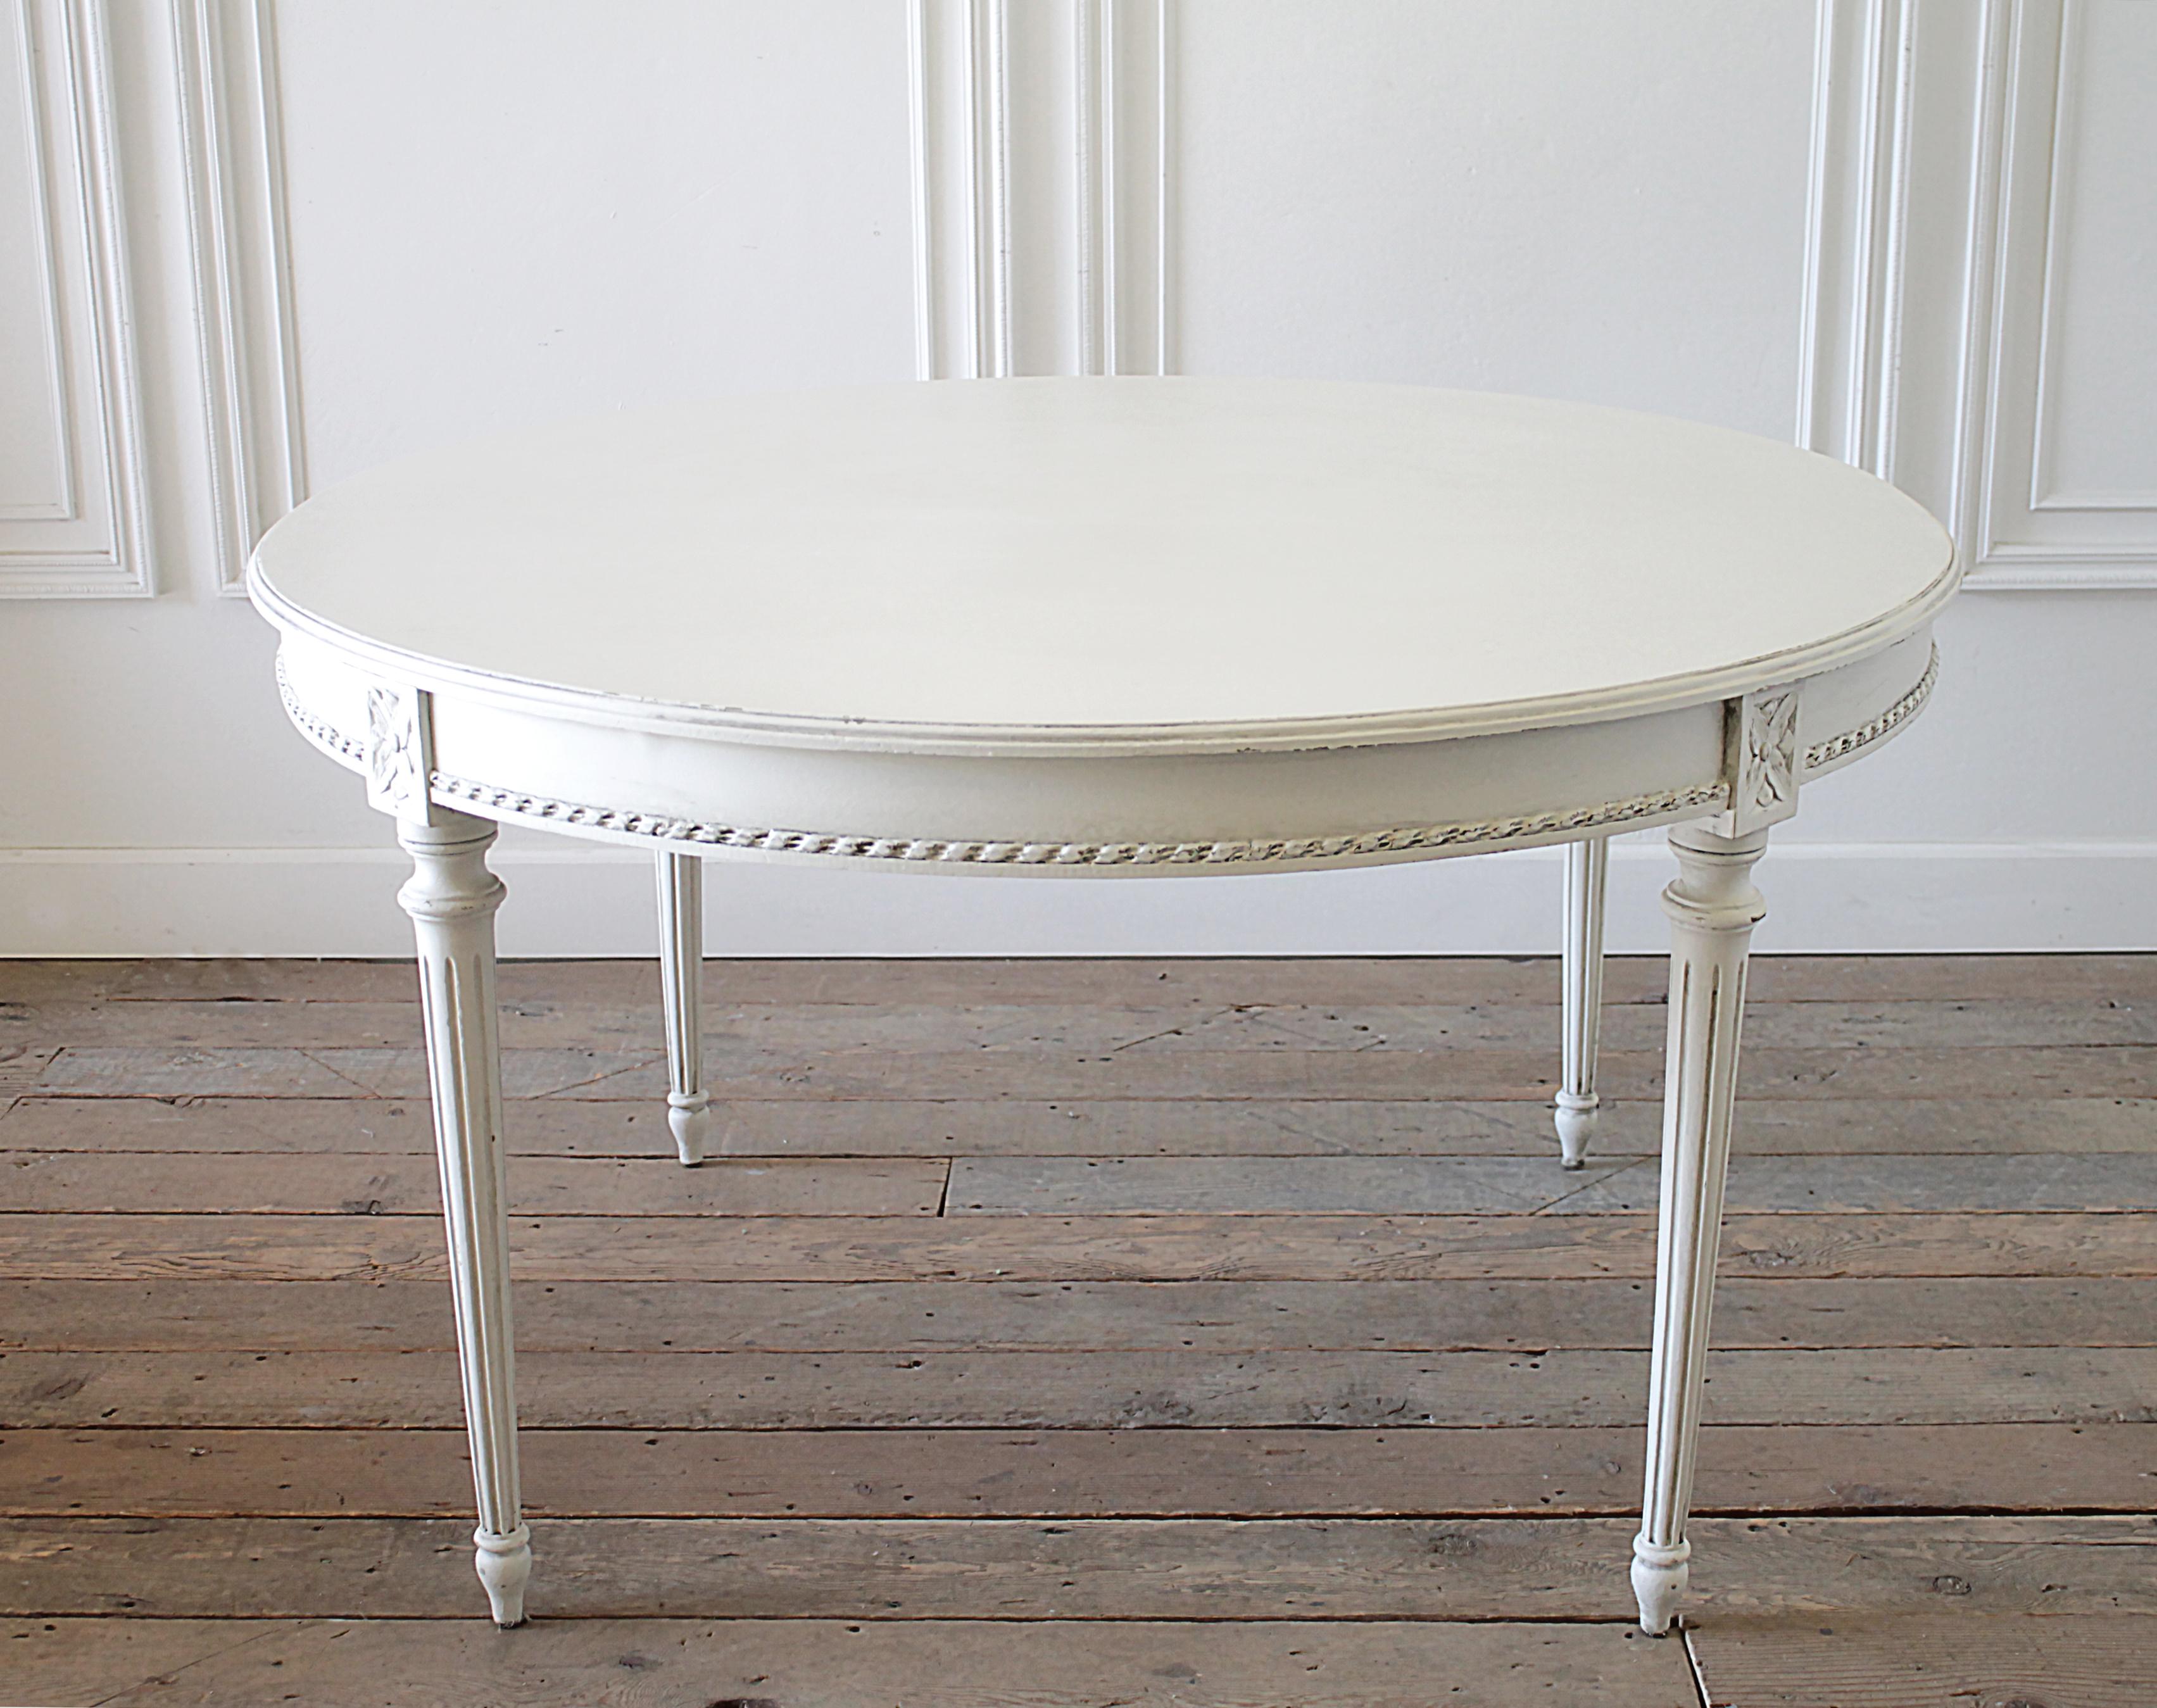 Early 20th century painted round Louis XVI style dining table
Painted in our oyster white finish, with subtle distressed edges, and soft antique glazed patina. Color is white, with a light greyish hue from the glaze, overall table is white.
Legs